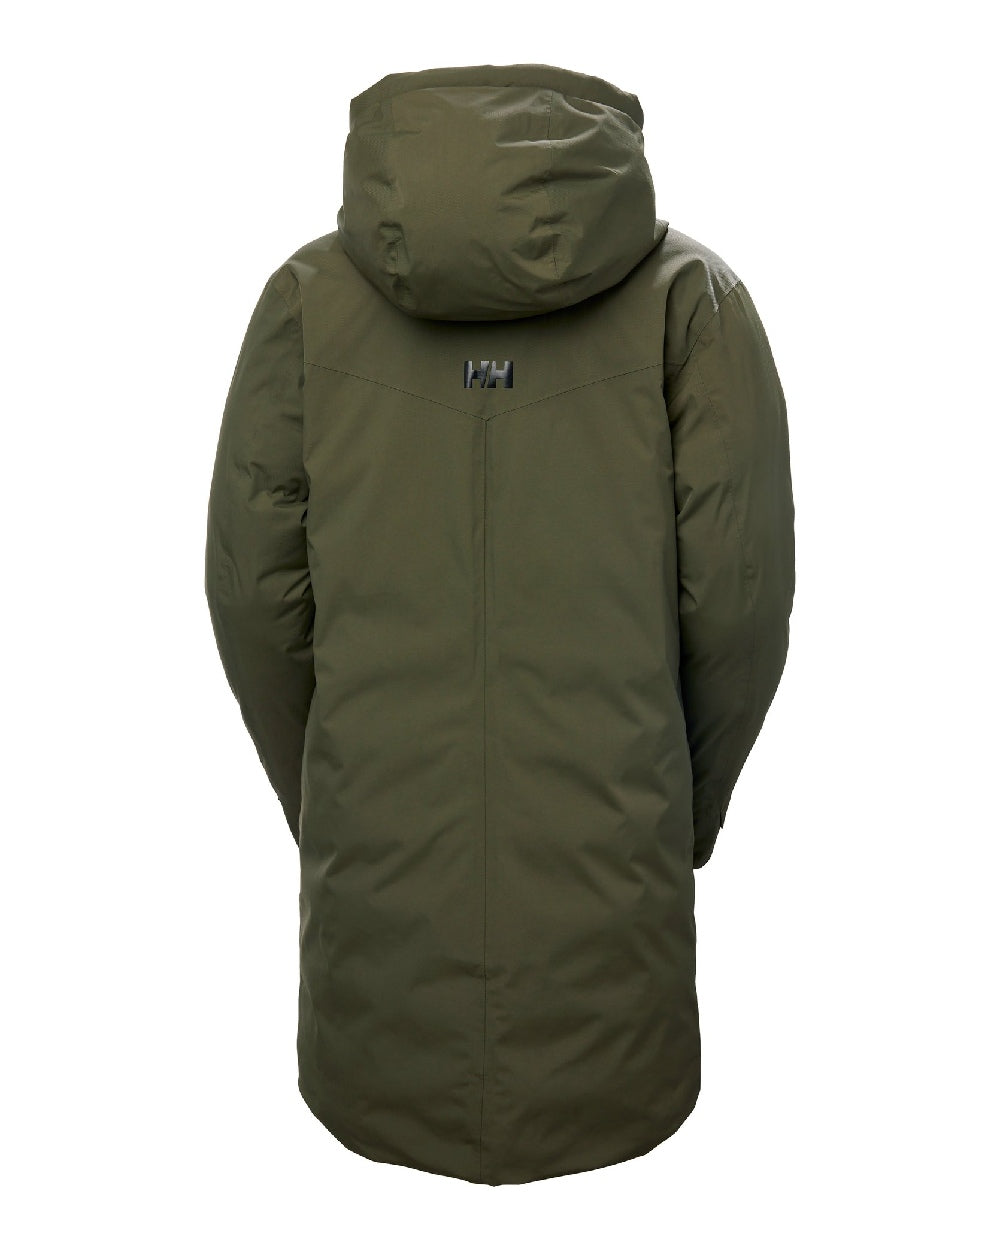 Helly Hansen Womens Adore Helly Tech Parka in Utility Green 